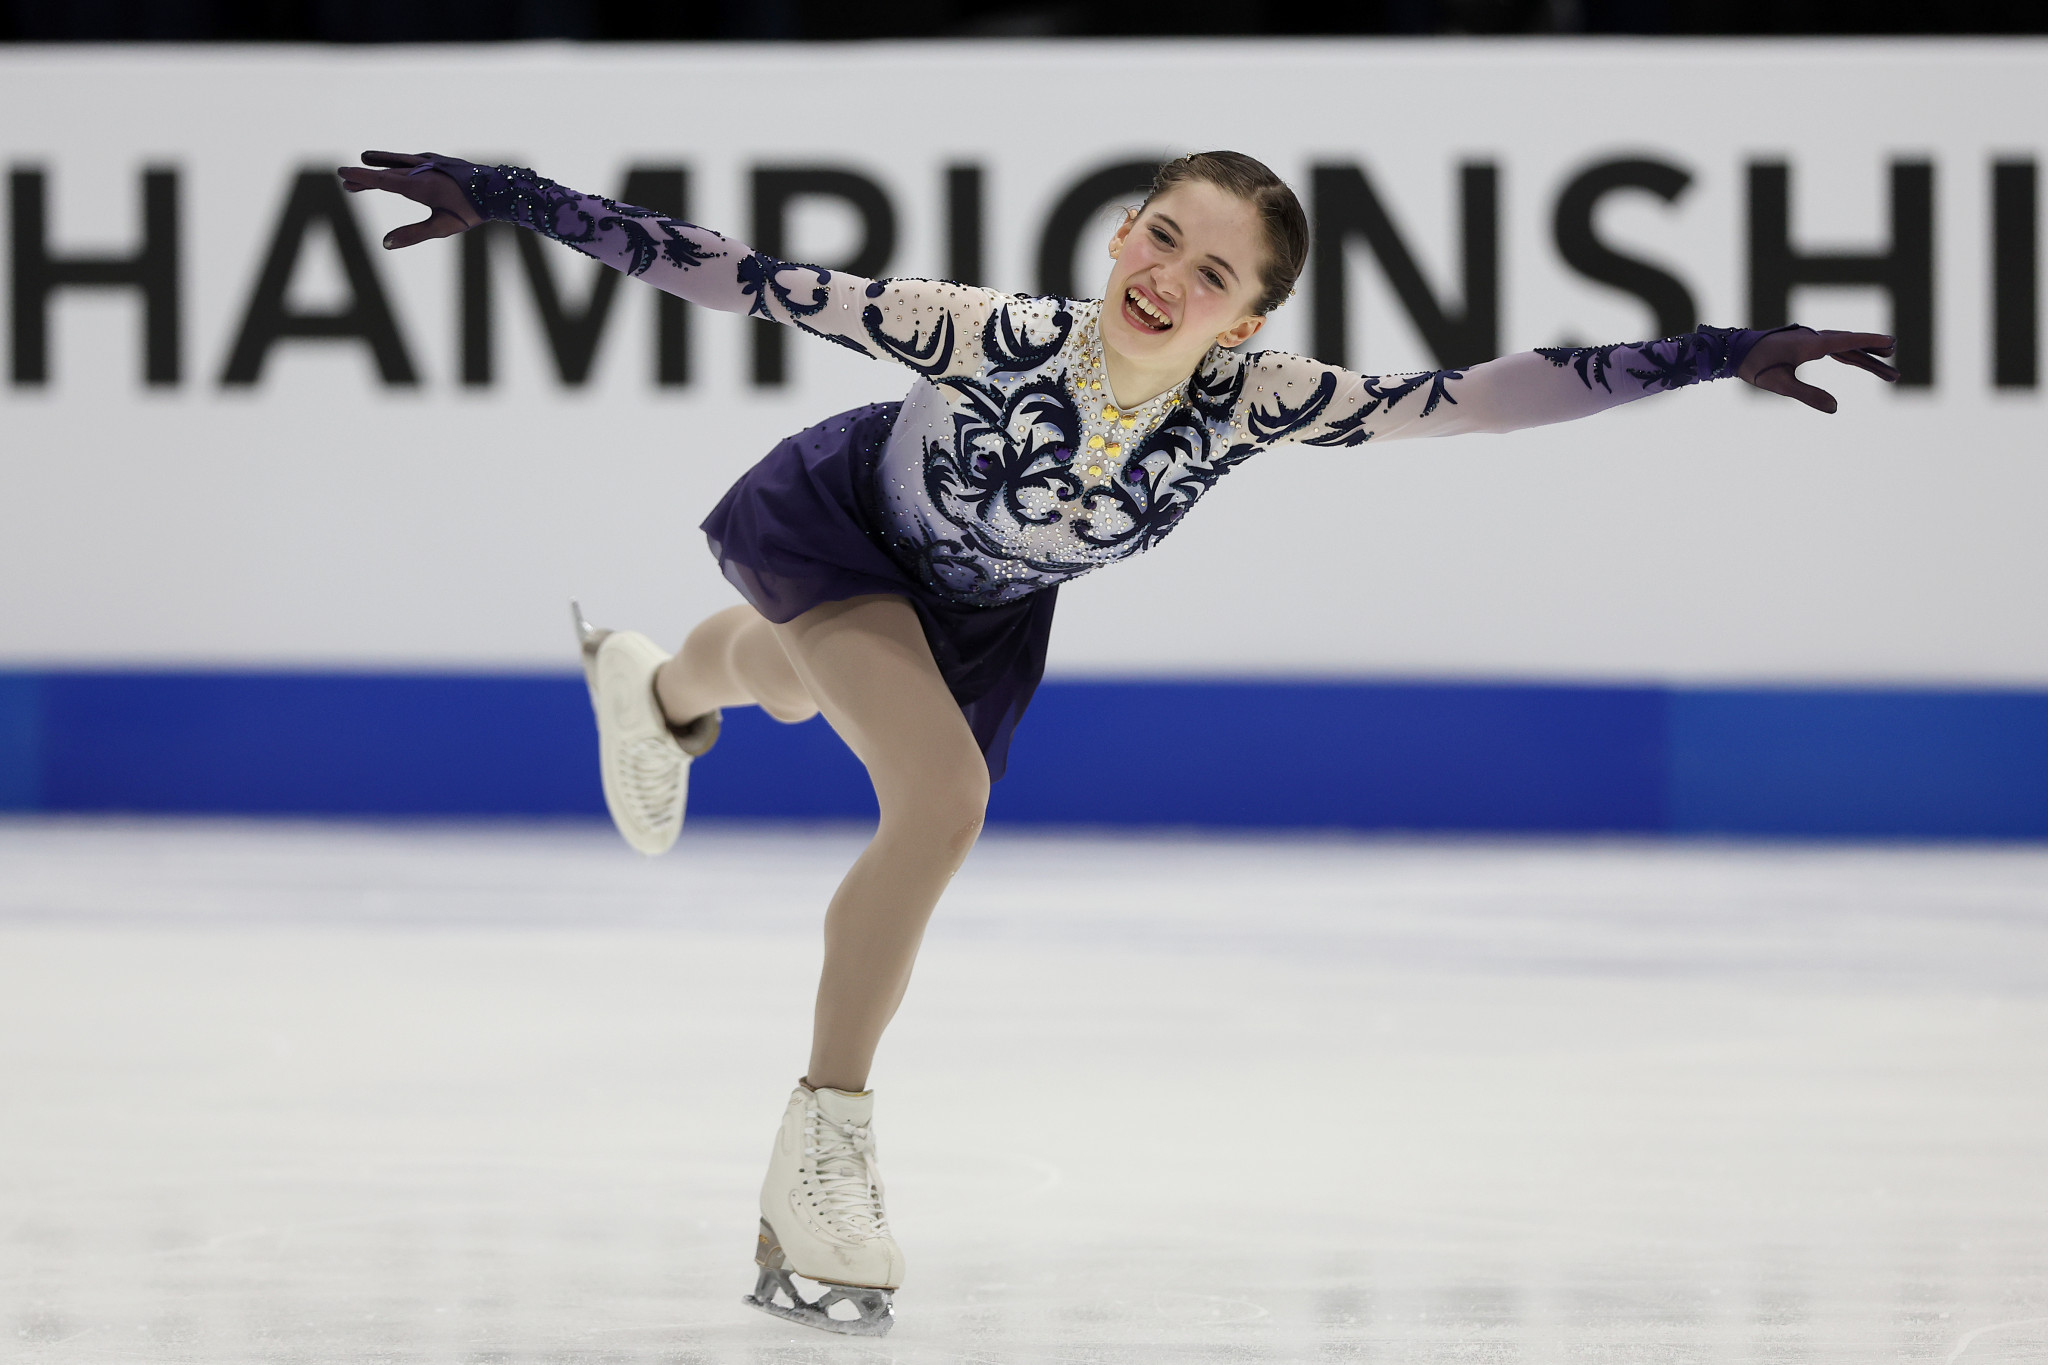 Levito wins women's title in absence of Russians at World Junior Figure Skating Championships